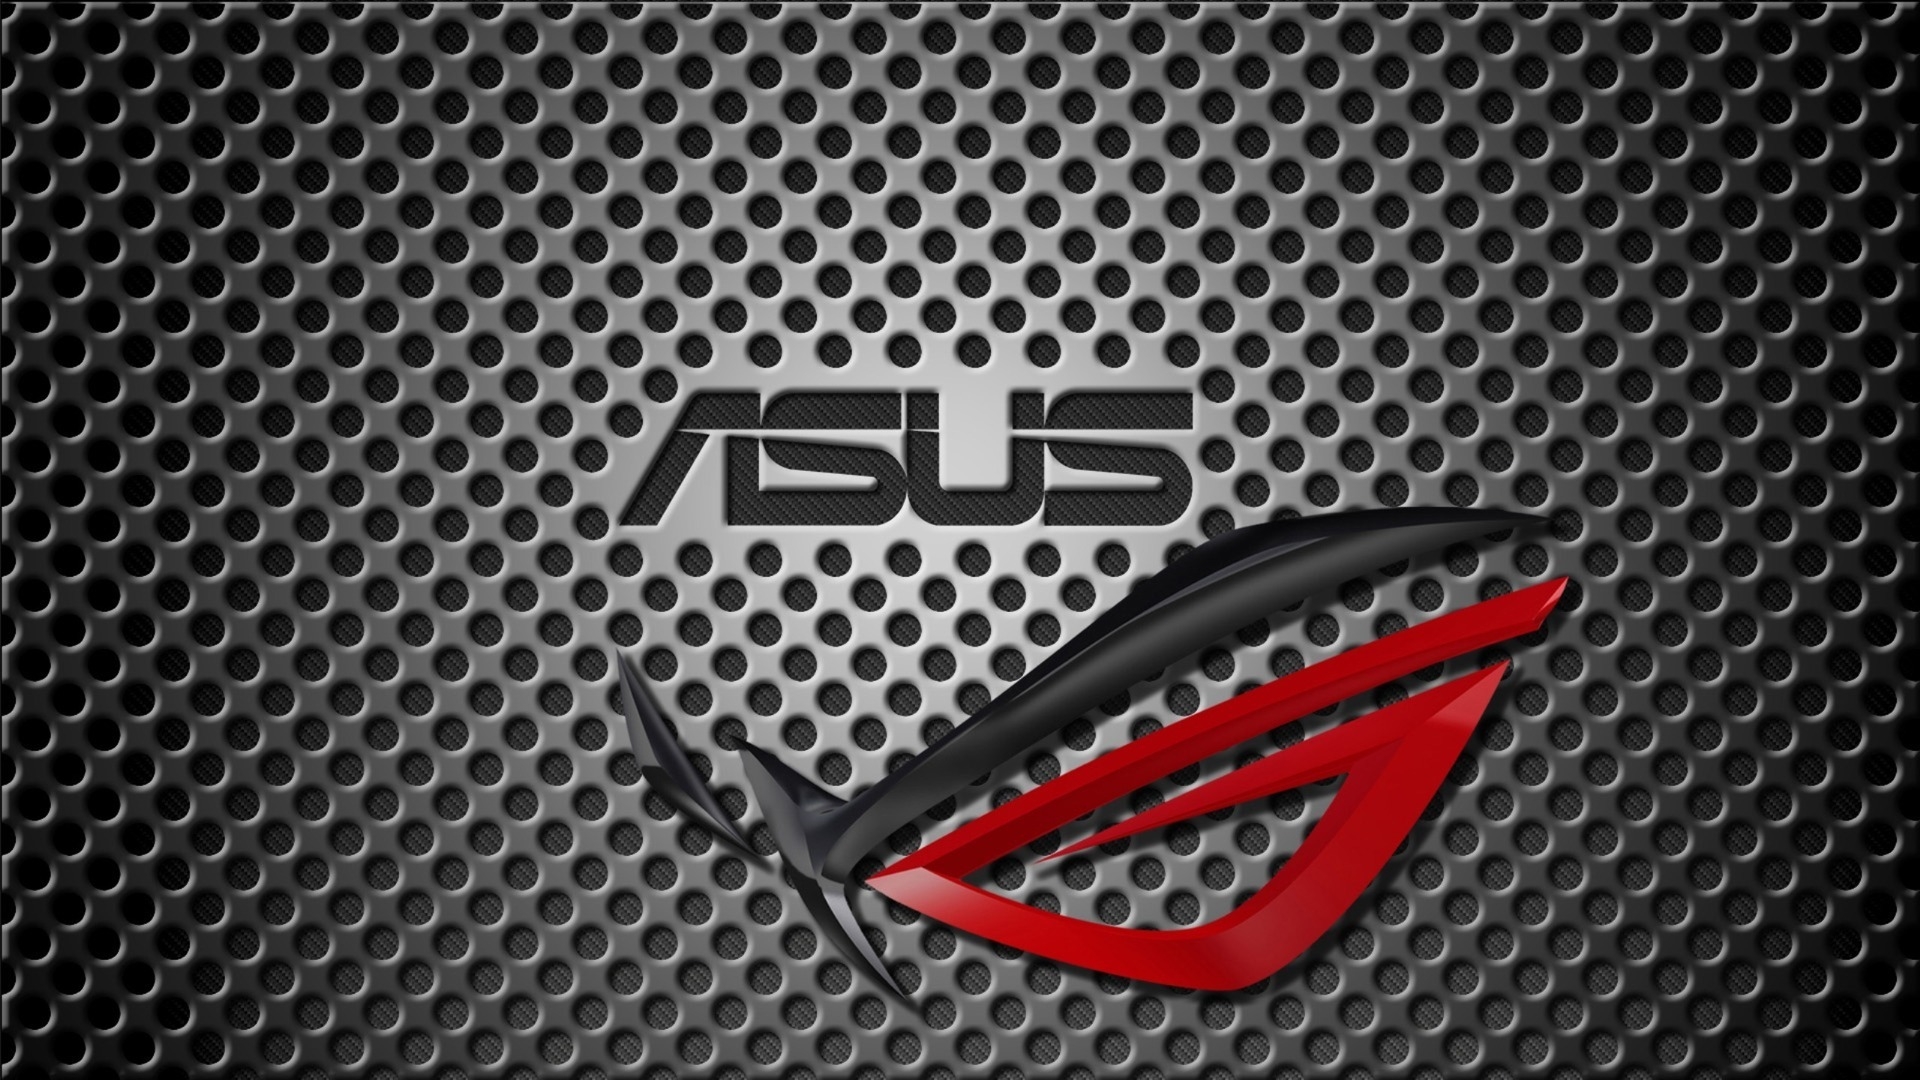 Asus Computer for 1920 x 1080 HDTV 1080p resolution